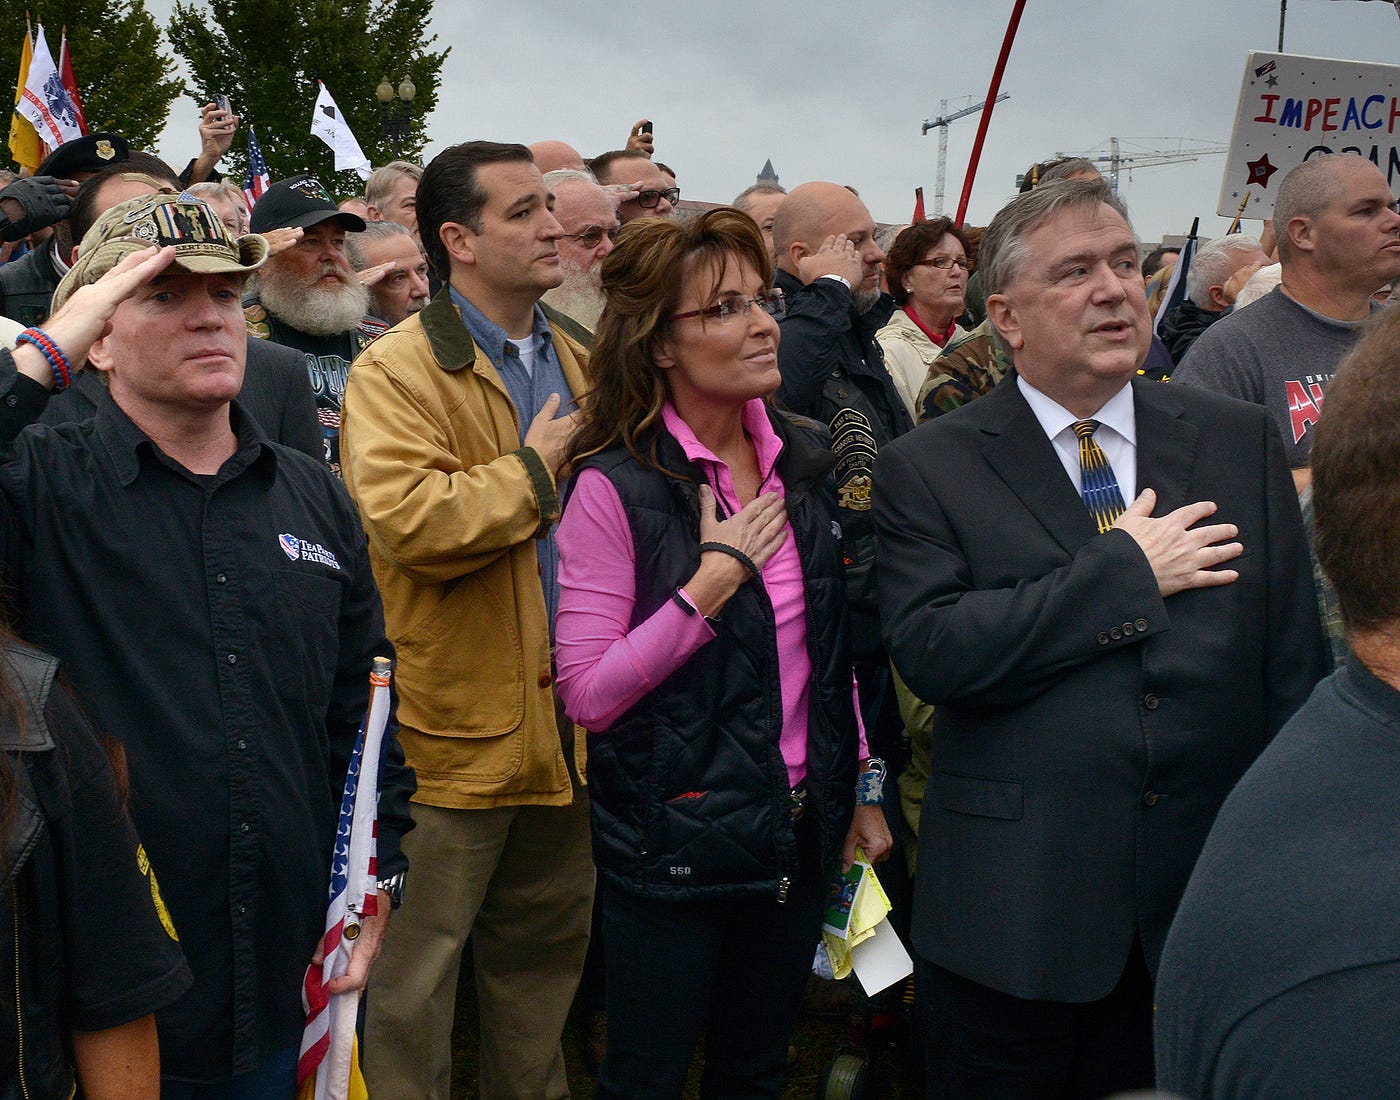 Former VP candidate Sarah Palin, Sen. Ted Cruz (R-TX), and others hold their hands over their hearts at a rally.